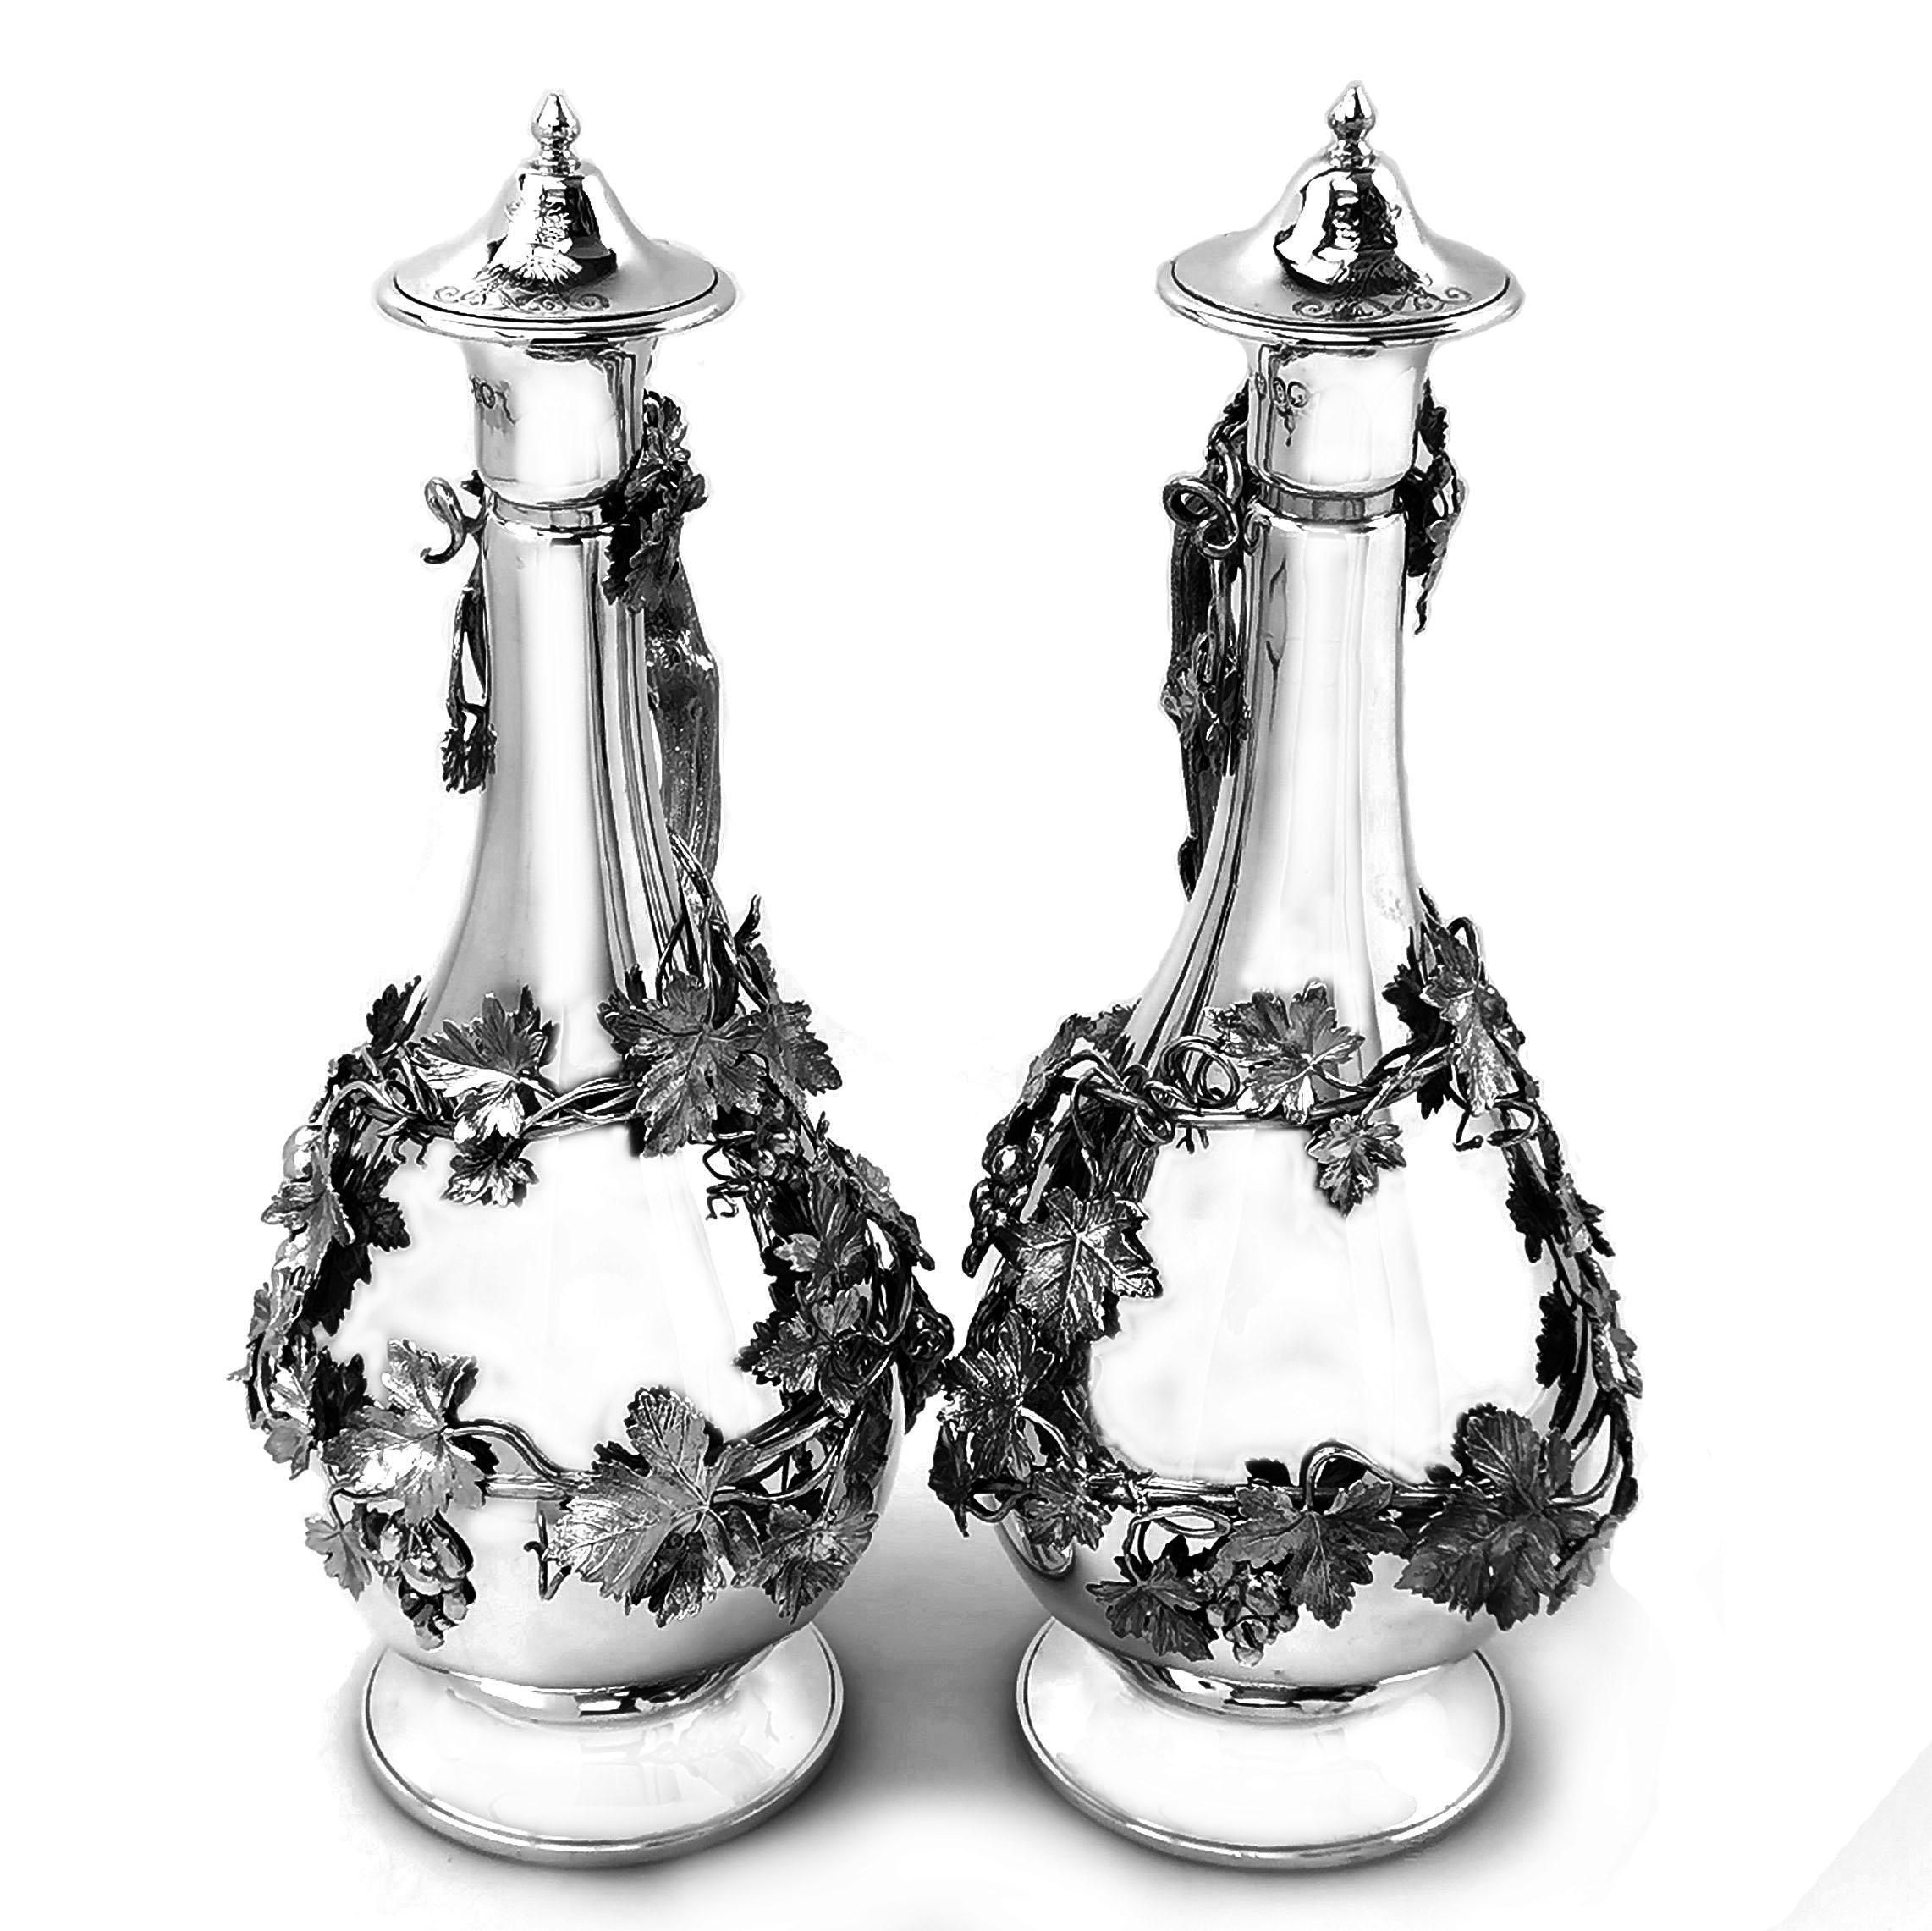 English Pair of Antique Victorian Sterling Silver Claret Jugs Ewers Wine Decanters 1860